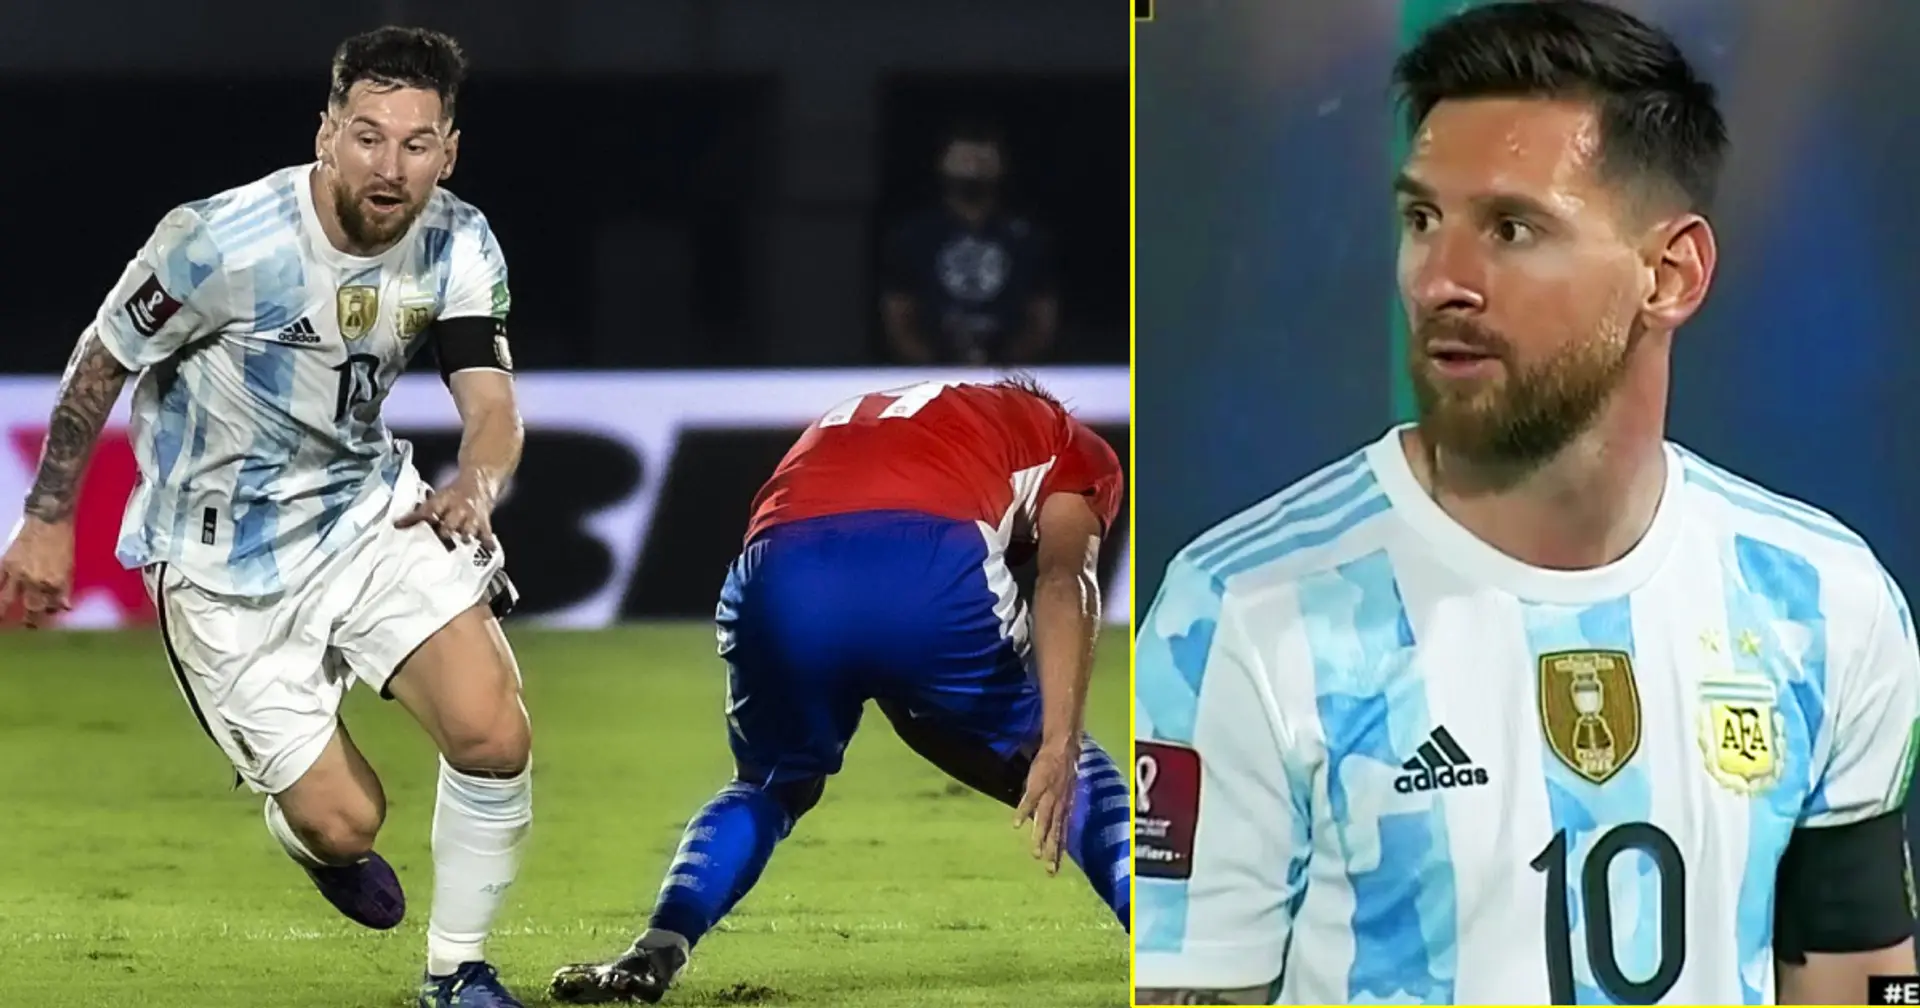 Lionel Messi stuns Paraguay defender who tries to mark him, sends him tumbling